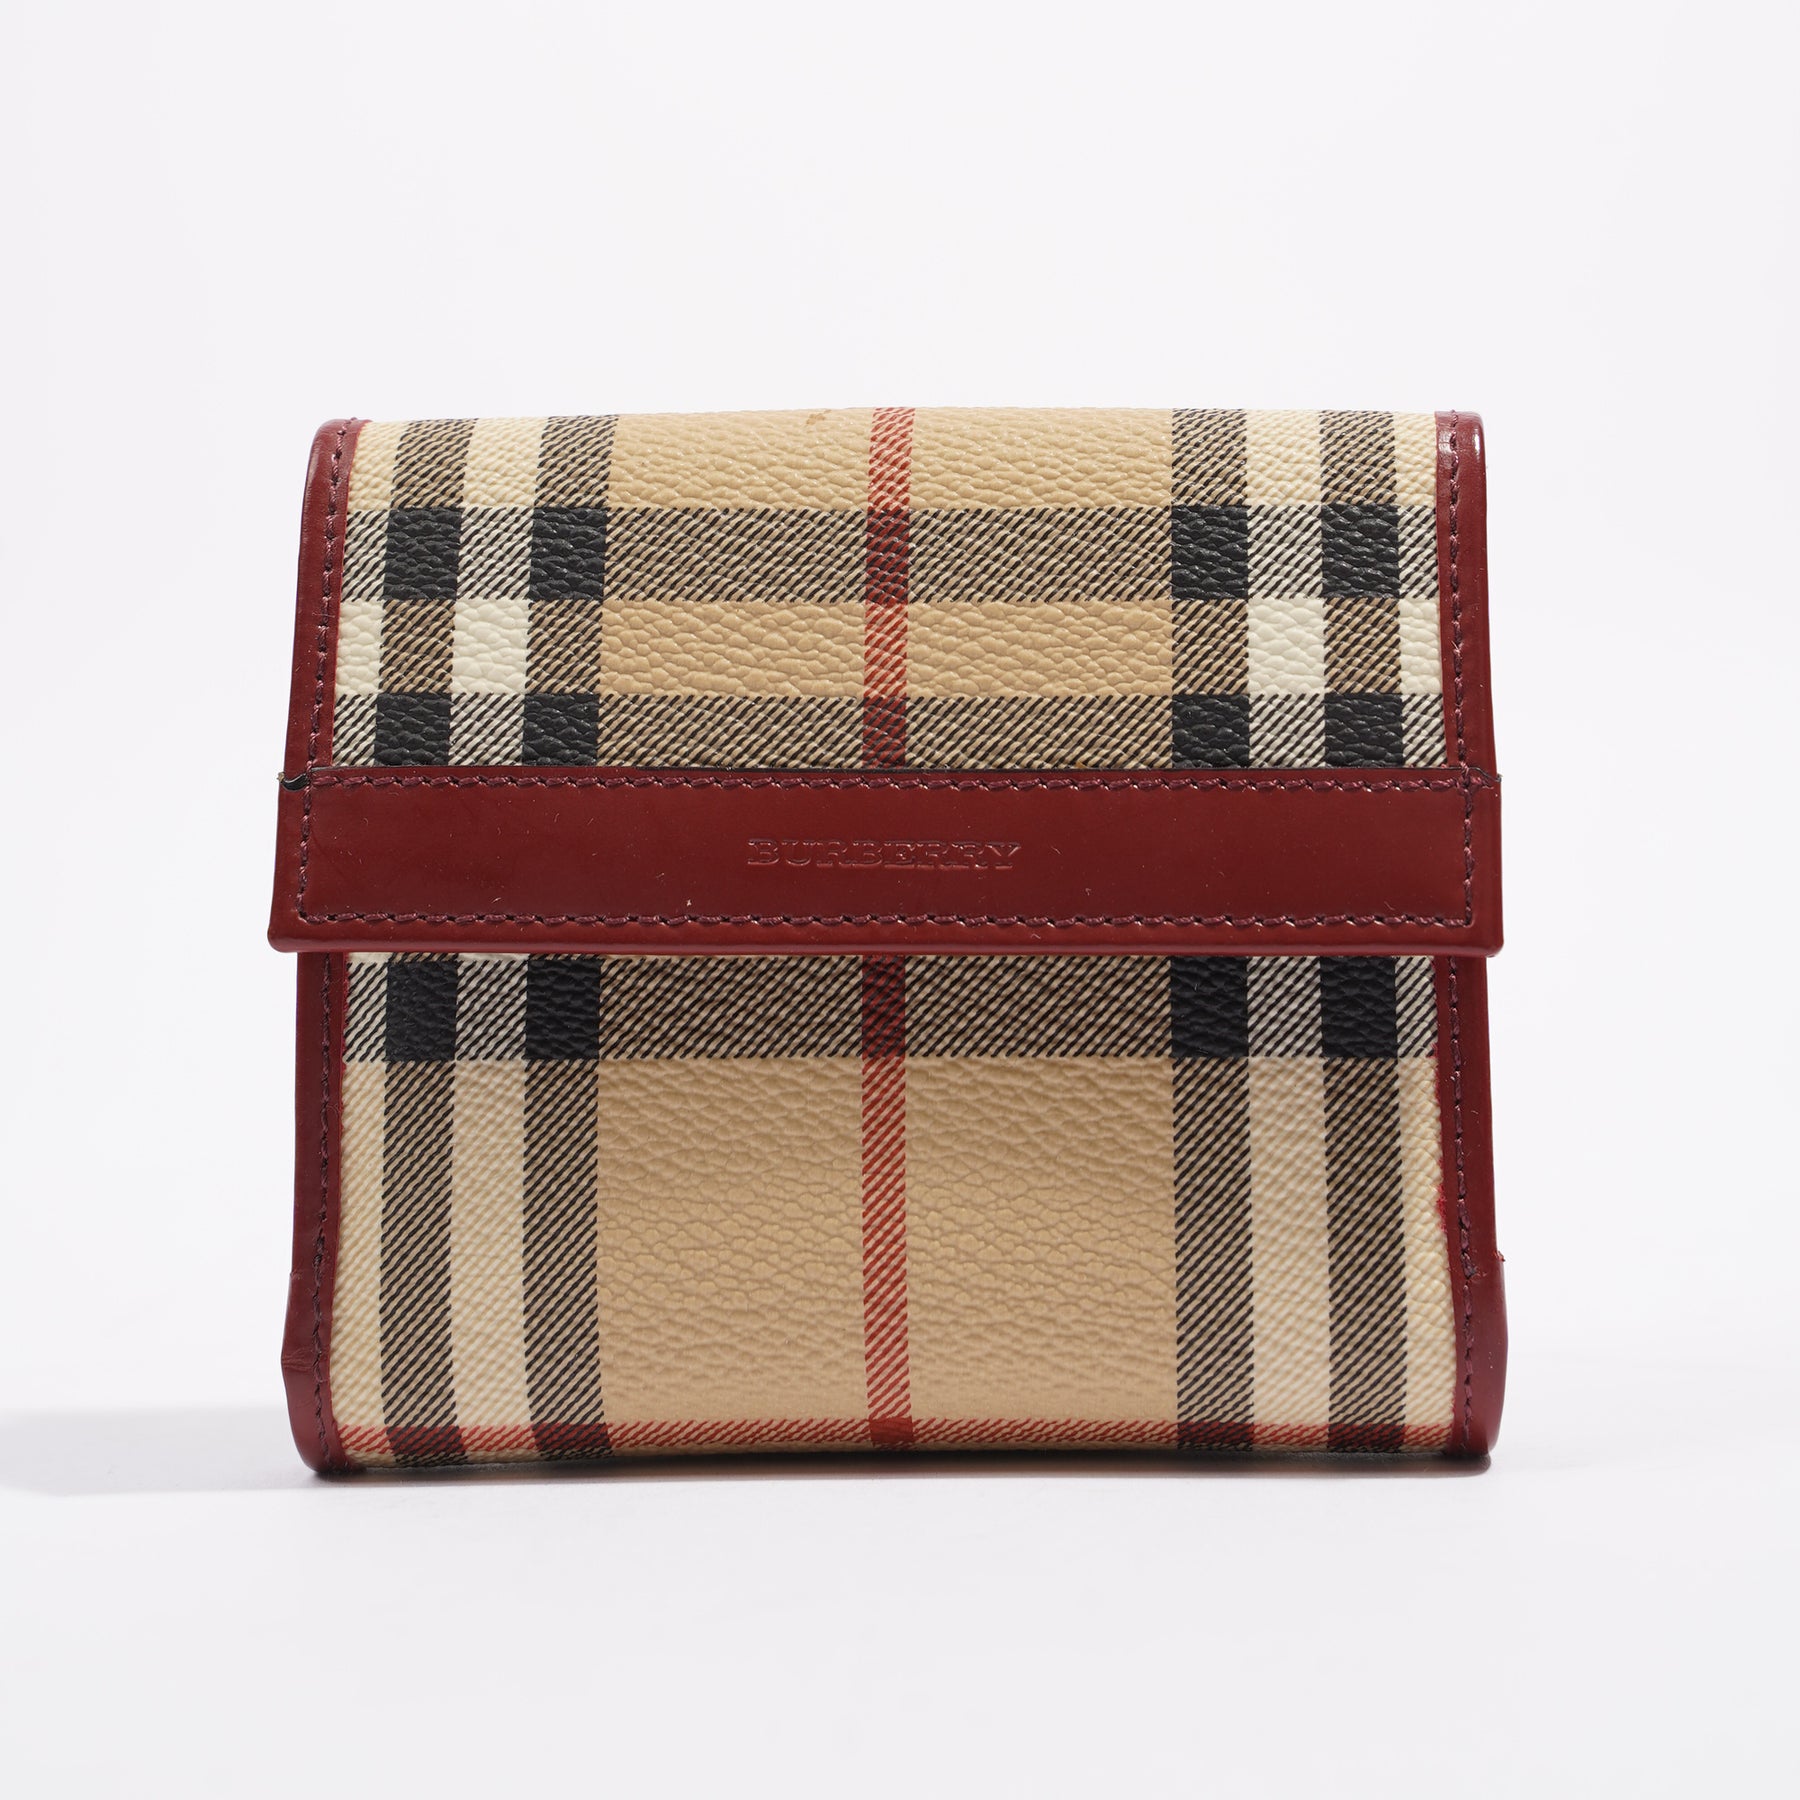 BURBERRY Long Wallet Zip Plaid Red Color Accessory from Japan Used